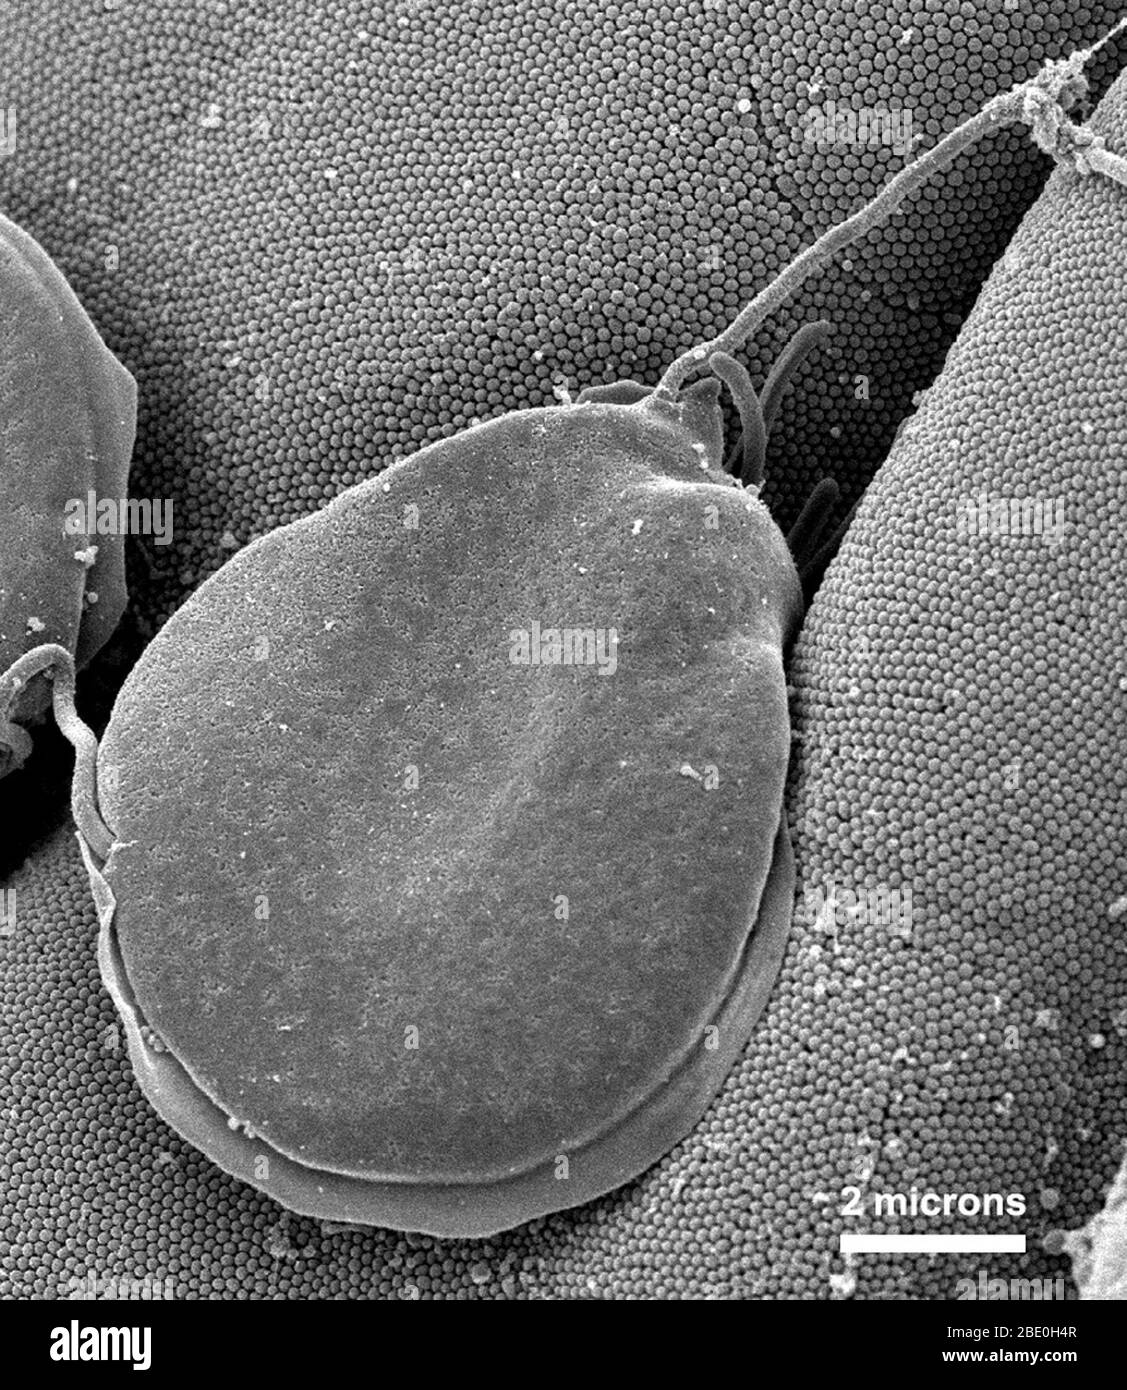 Scanning Electron Micrograph (SEM) showing Giardia muris protozoan settled atop intestinal mucosal villi, adhering itself to the microvillous border of intestinal epithelial cells. Each small circular profile under the protozoan represents the rounded tip of a single microvillous, and it is estimated that 2000 to 3000 microvilli cover the surface of a single intestinal epithelial cell. The protozoan Giardia causes the diarrheal disease called giardiasis. Stock Photo